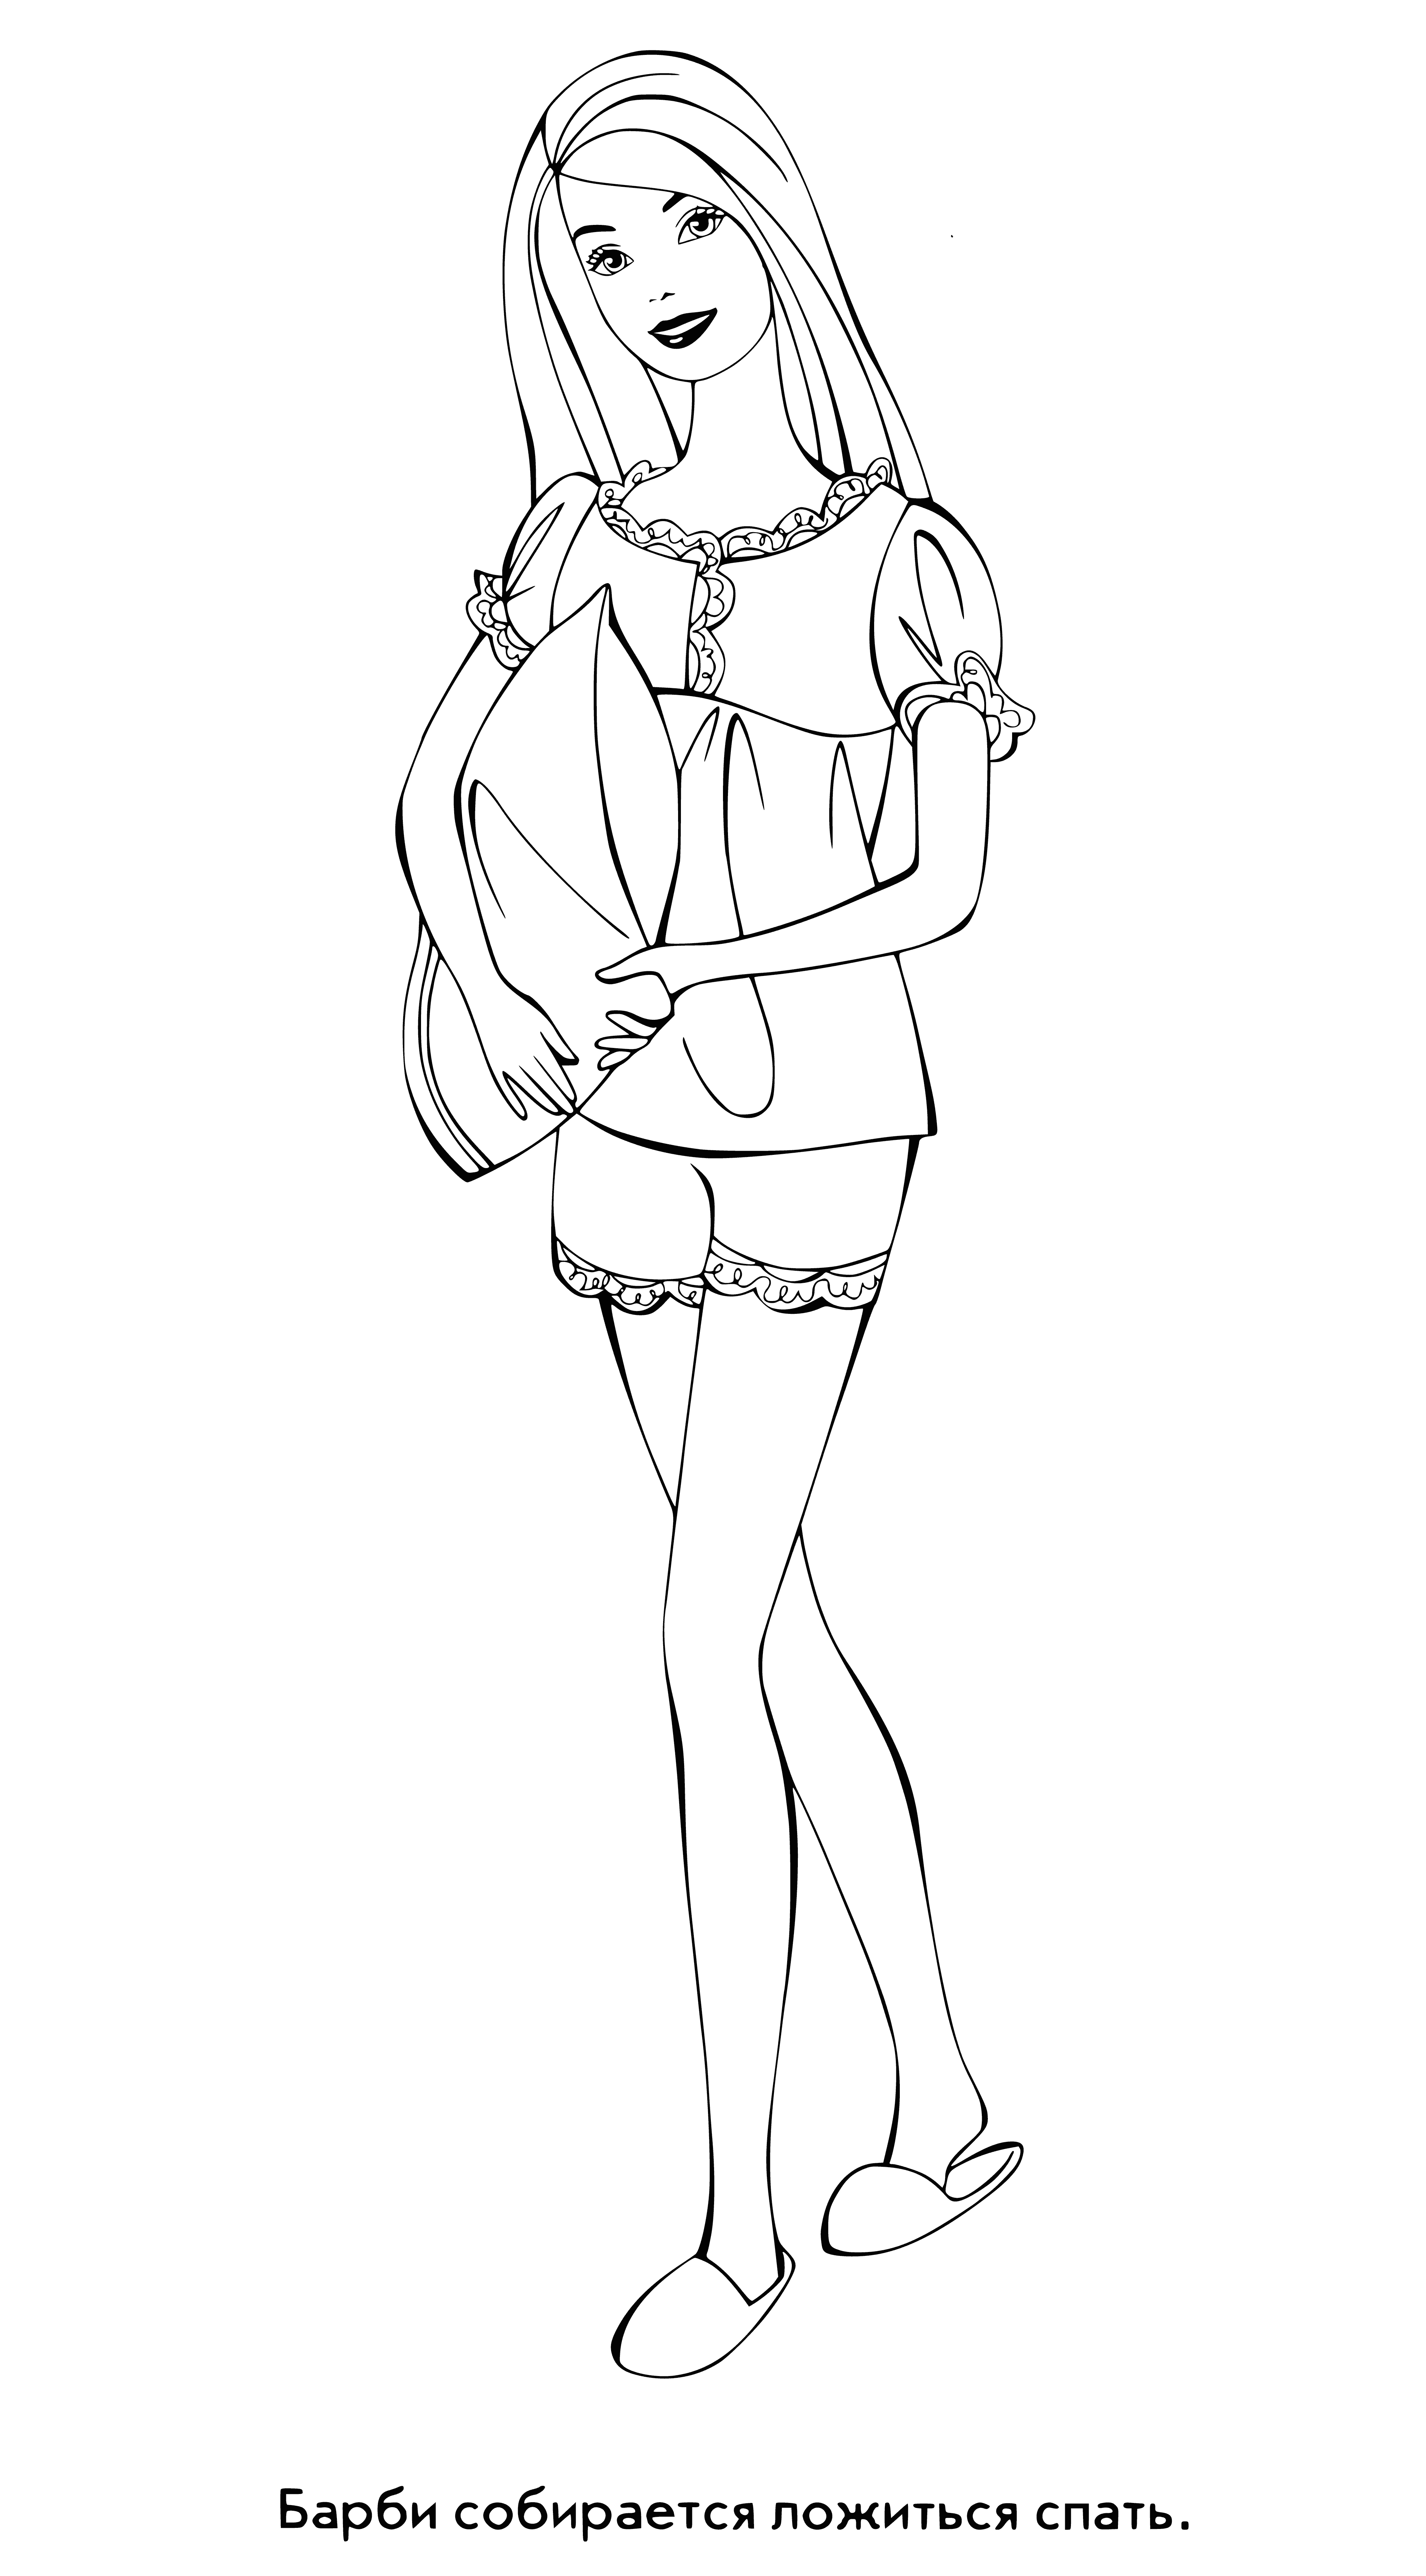 coloring page: Barbie lies in bed wearing a nightgown with a pillow & blanket. Eyes closed, arms at sides.